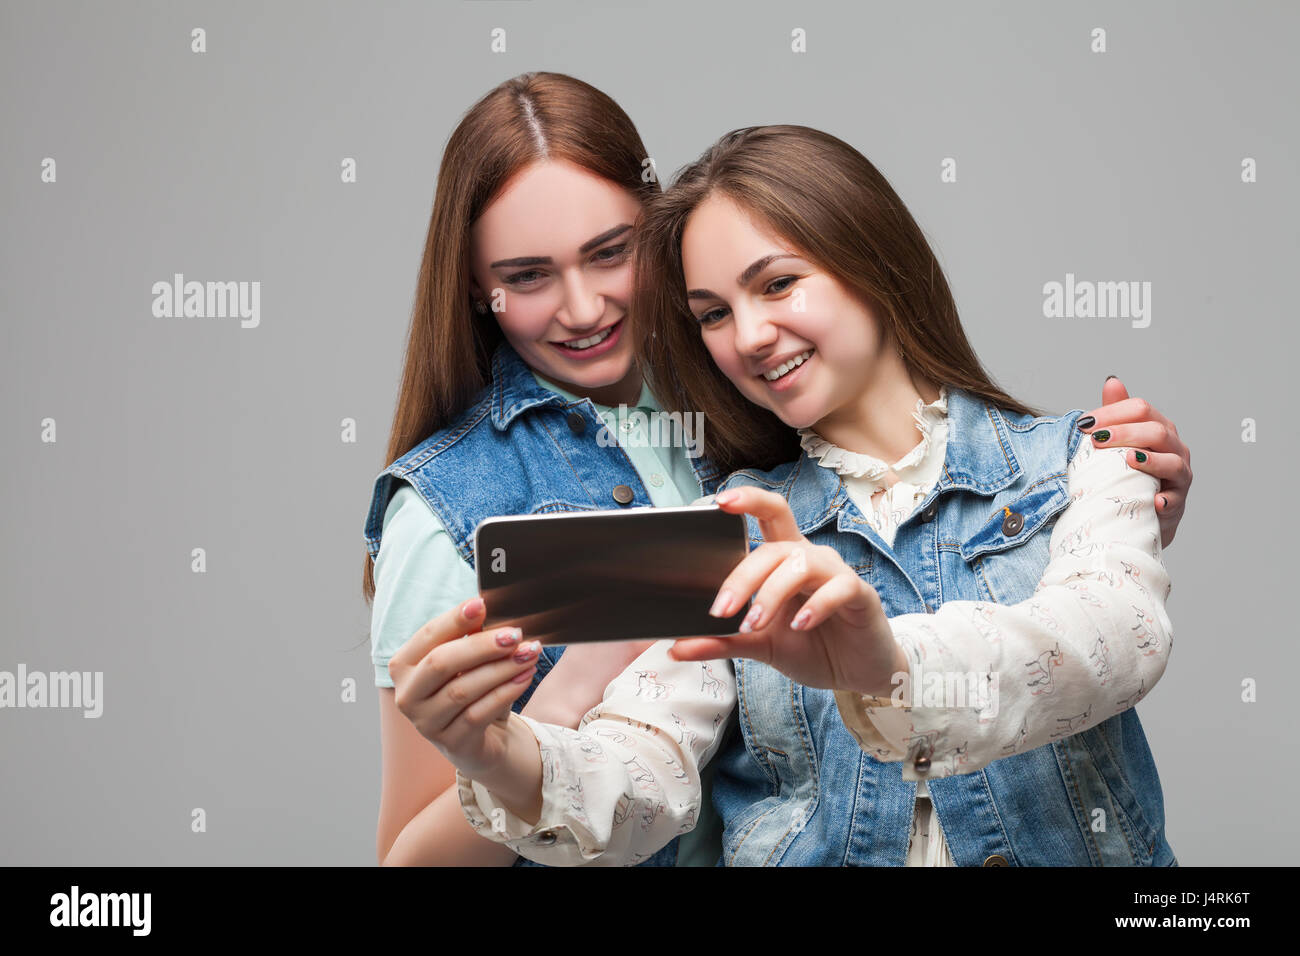 Two smiling girlfriends in denum jackets makes selfie on phone camera in studio. Female friendship. Leisure of happy girls Stock Photo